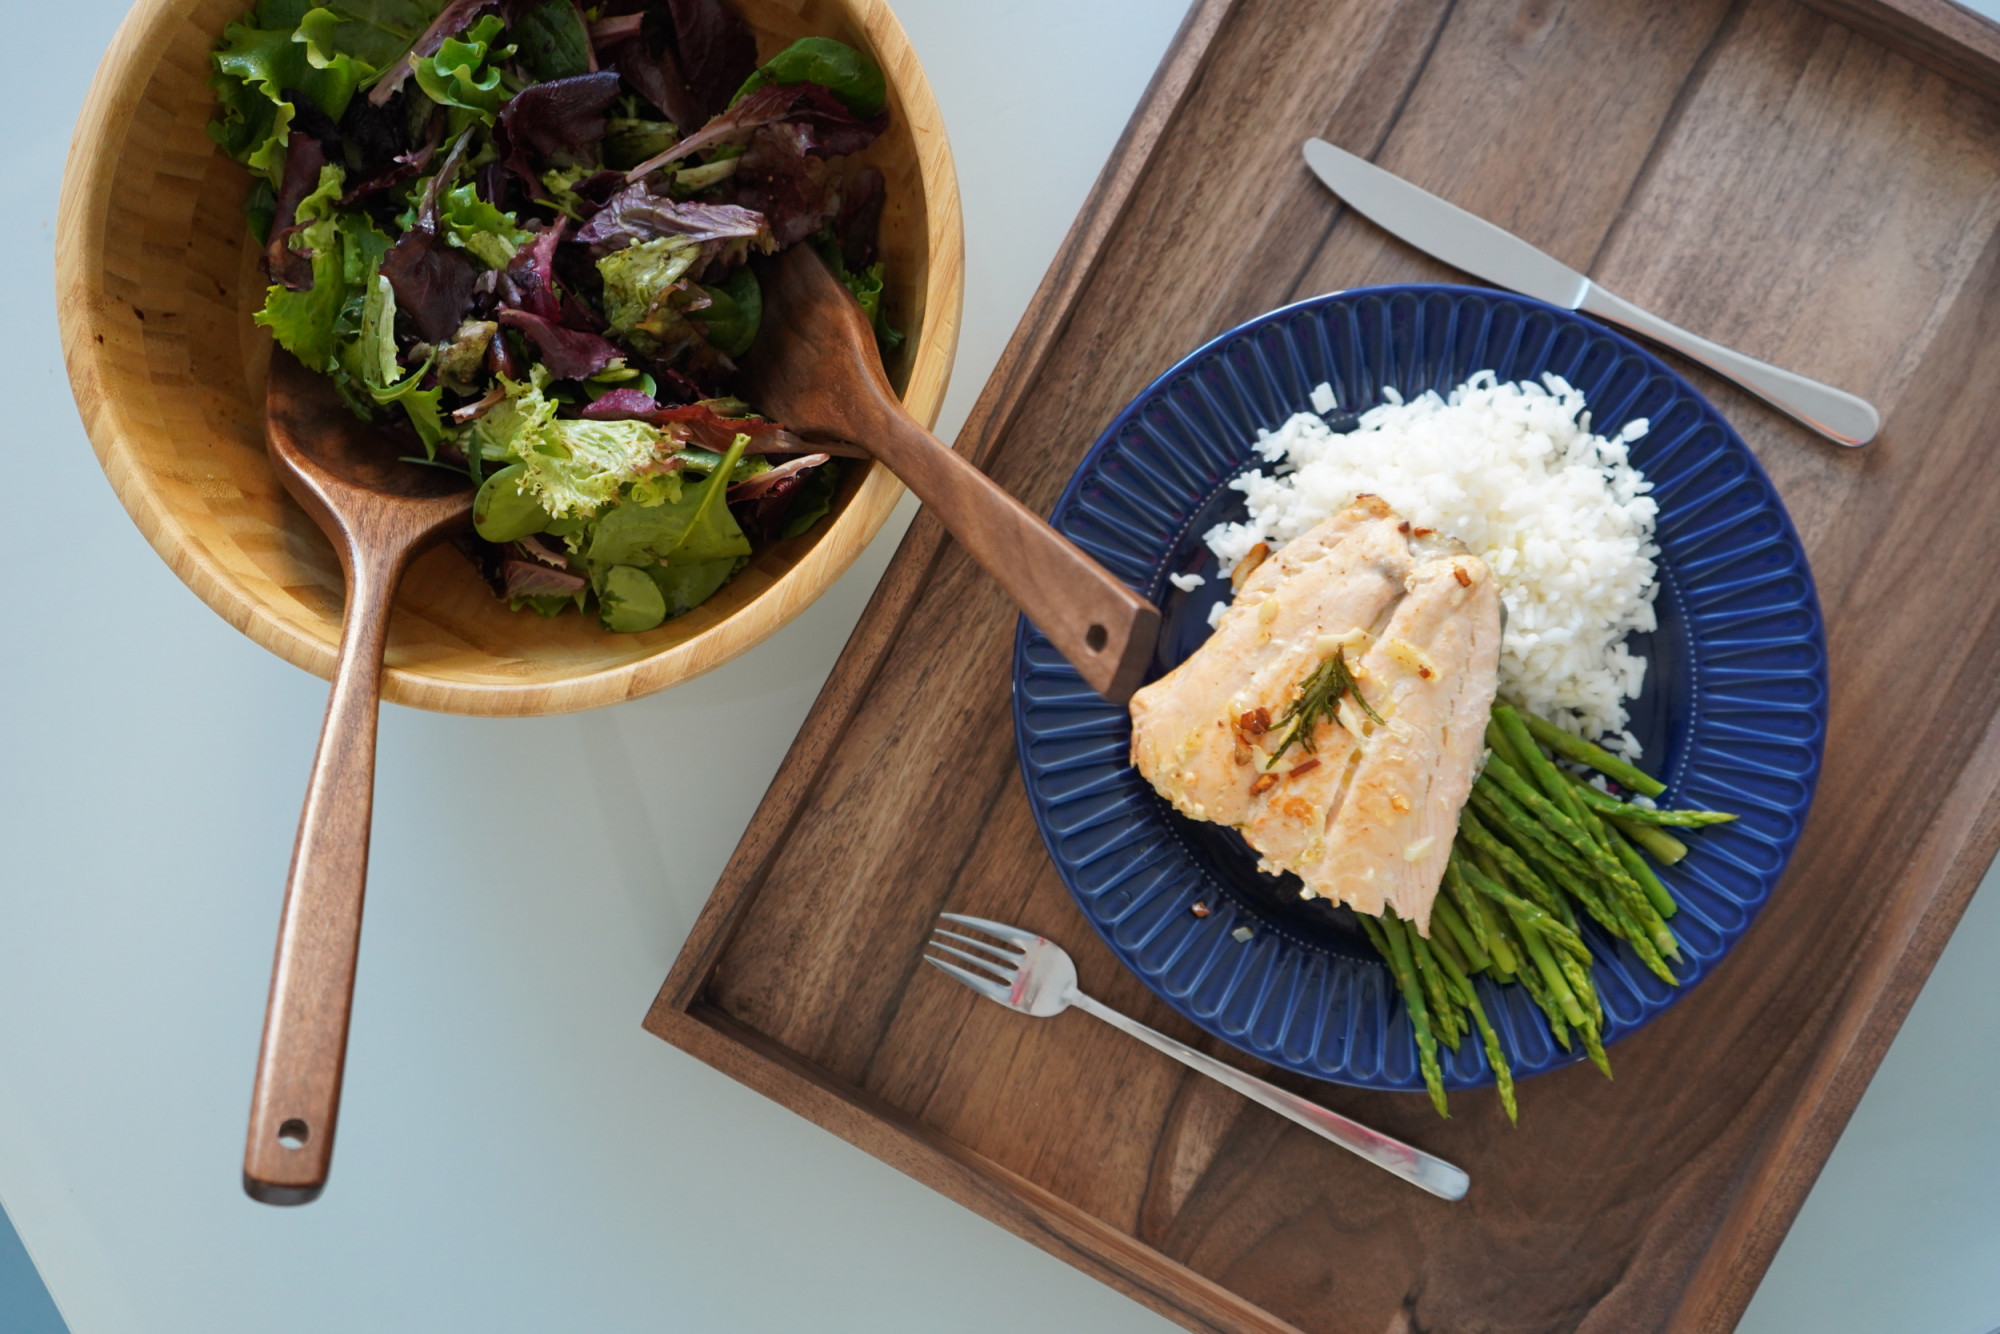 Cooked salmon and salad on wooden tray and dark walnut utensils